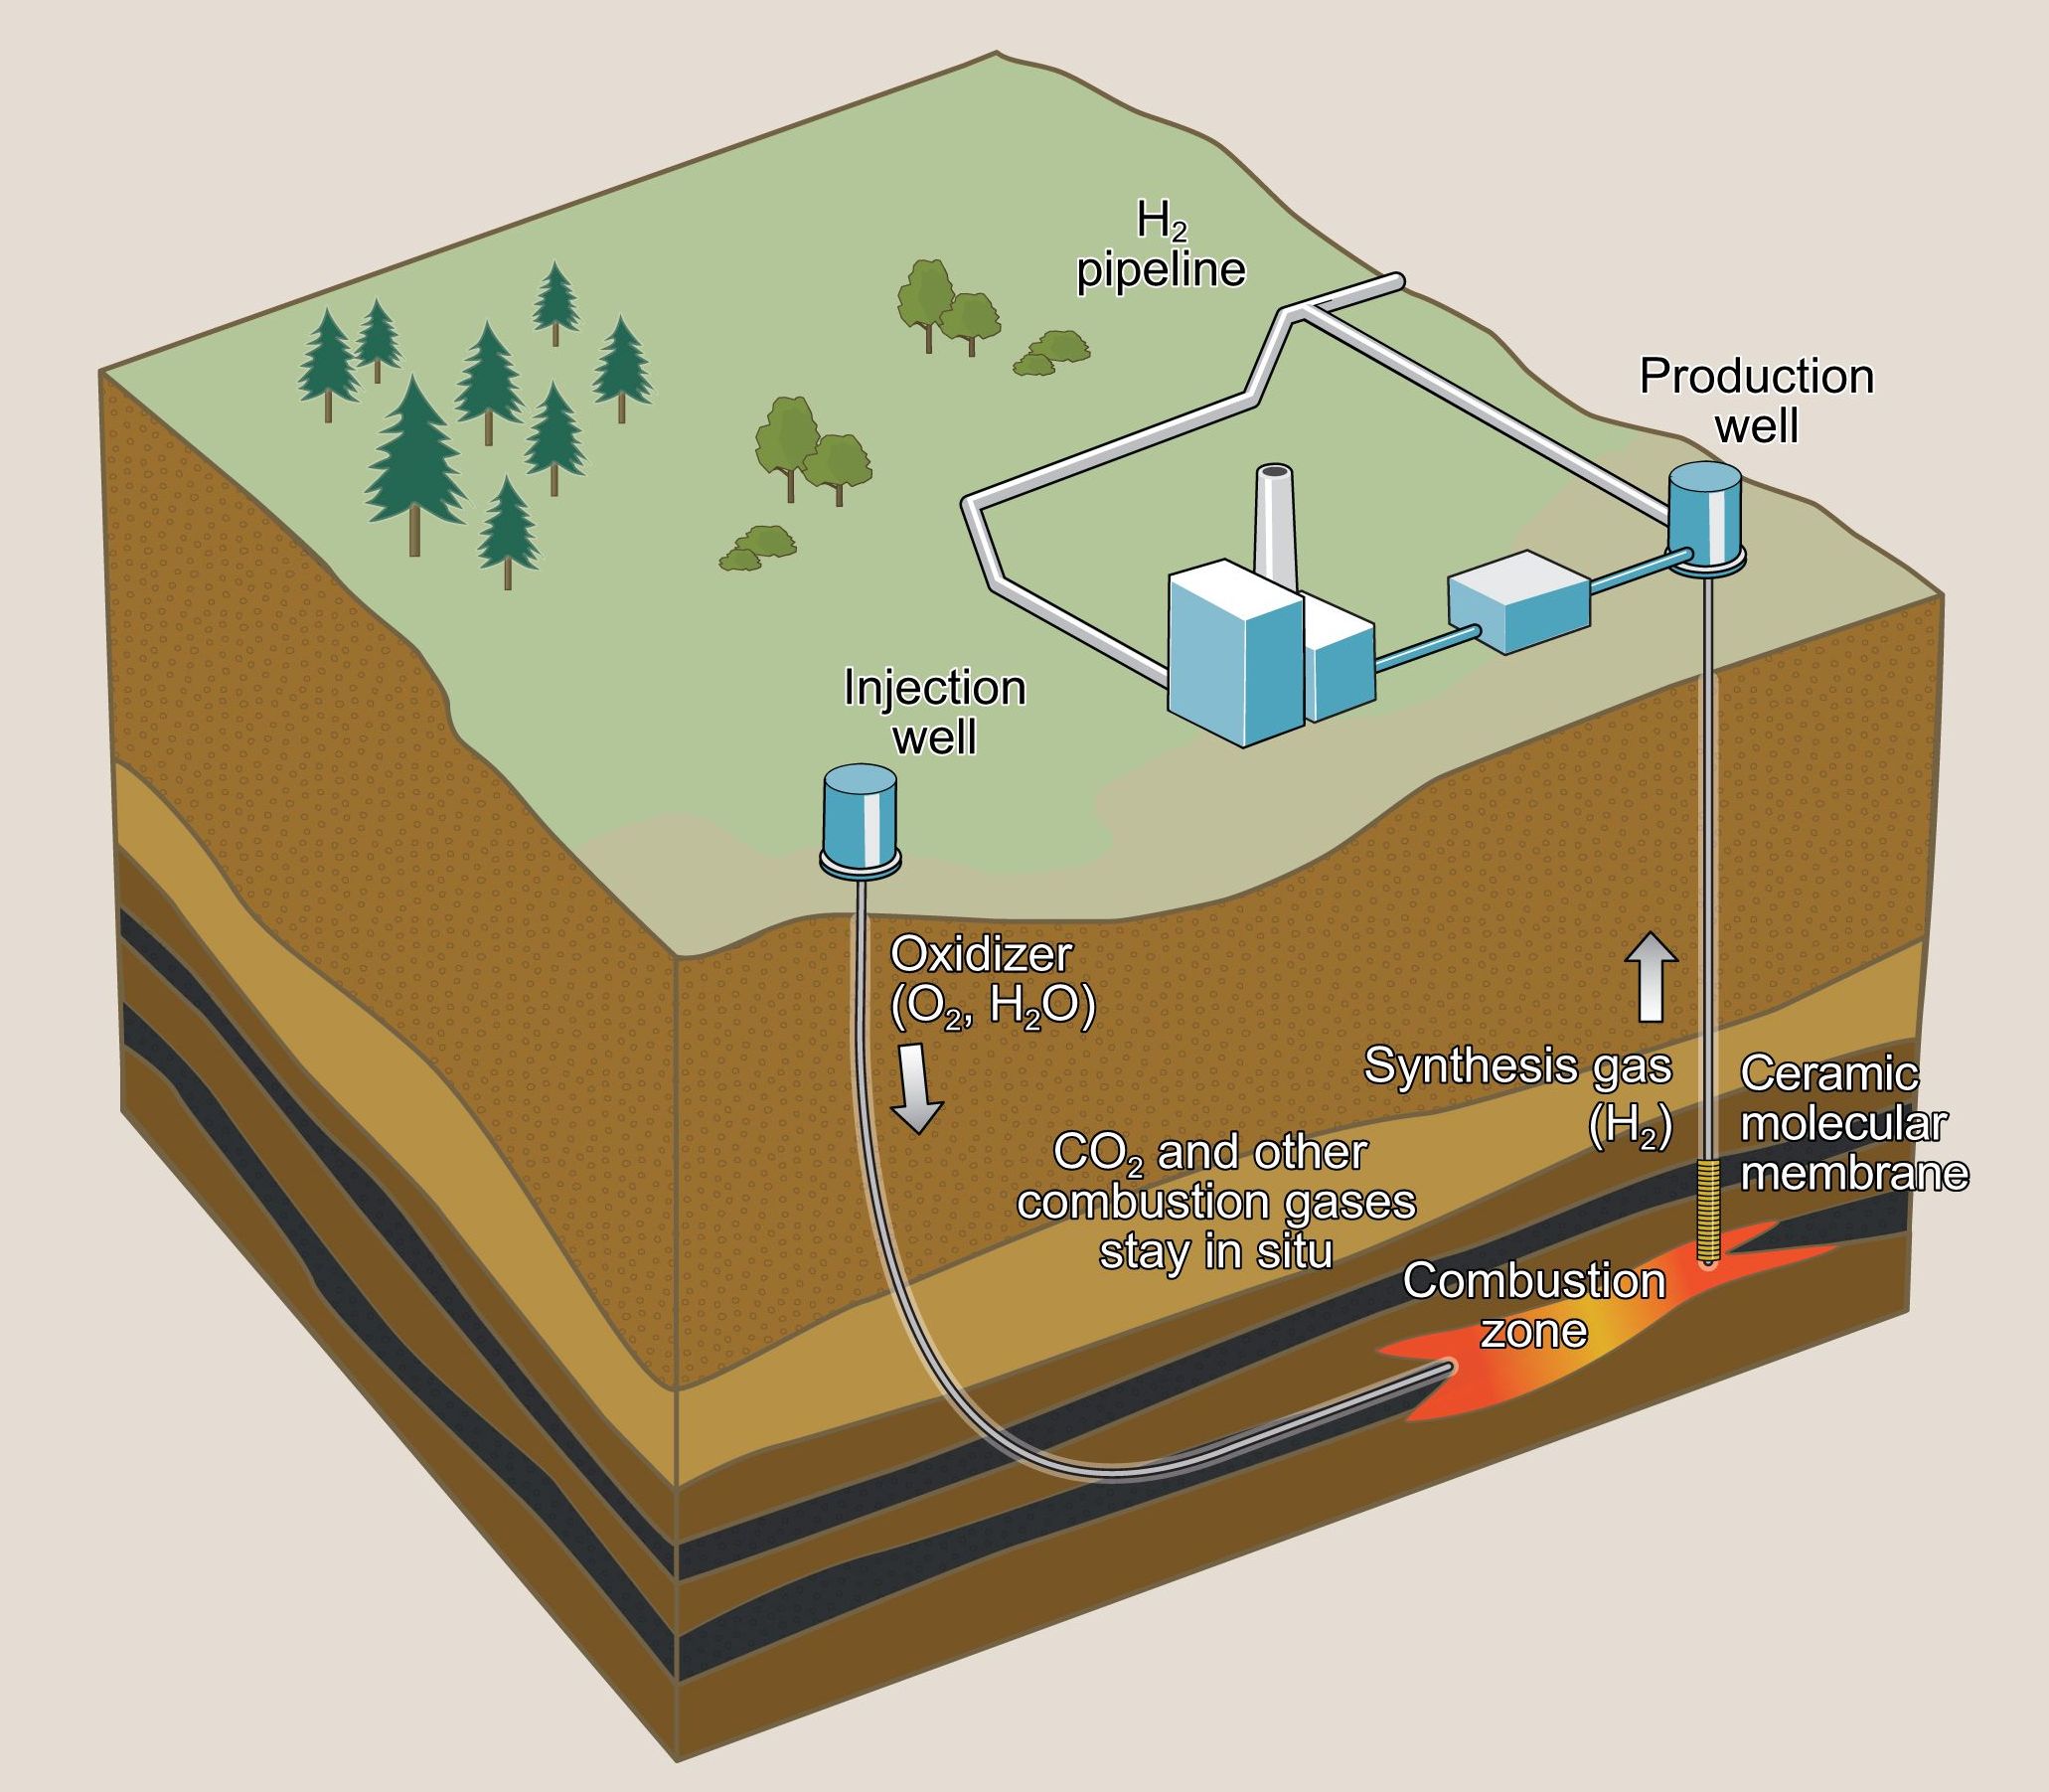 A Mini-Review on Underground Hydrogen Storage: Production to Field Studies